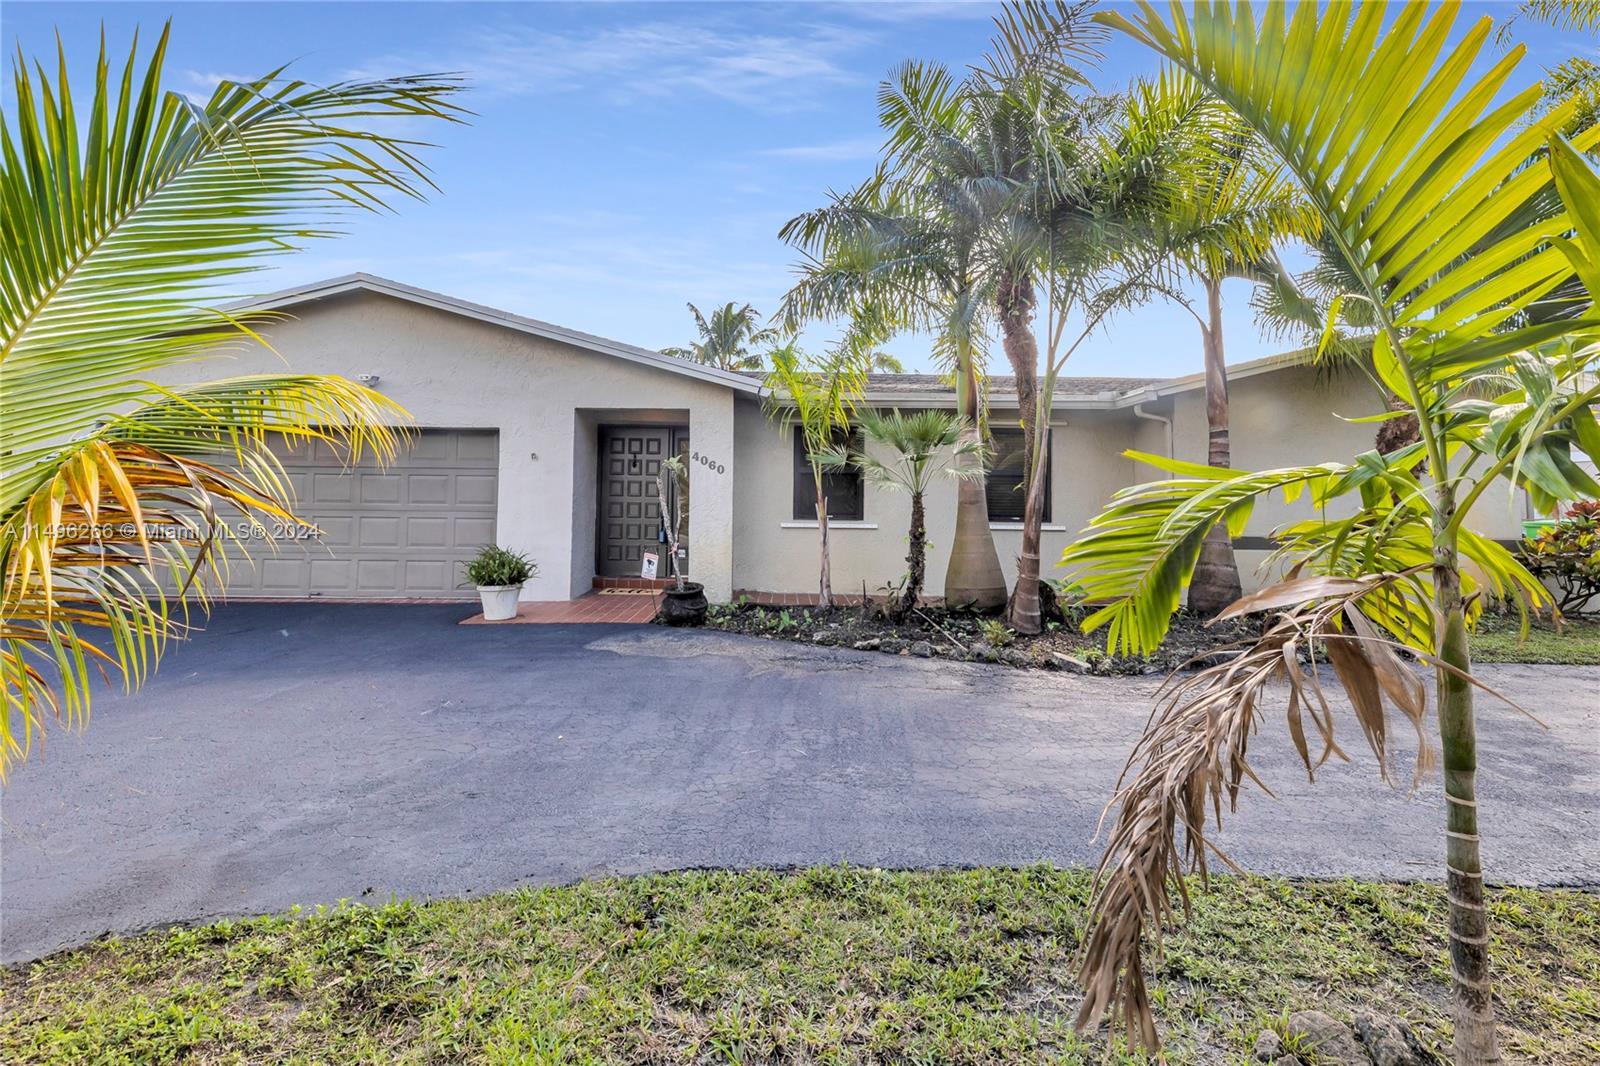 Photo of 4060 NW 120th Wy in Sunrise, FL